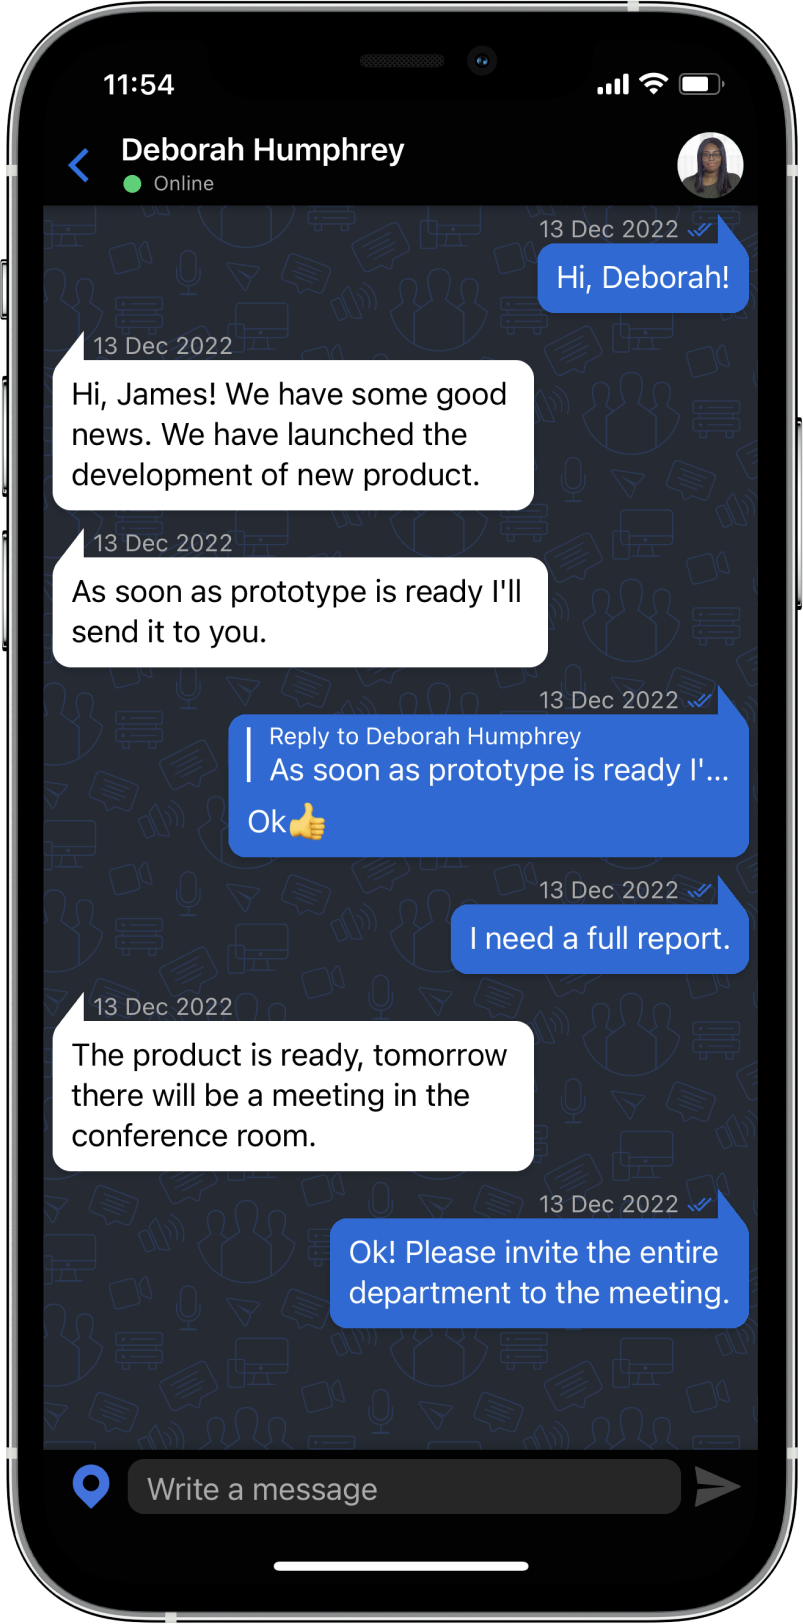 TrueConf 3.3 for iOS: new UI, Smart meeting mode, offline access to chats, contacts, and call history 13